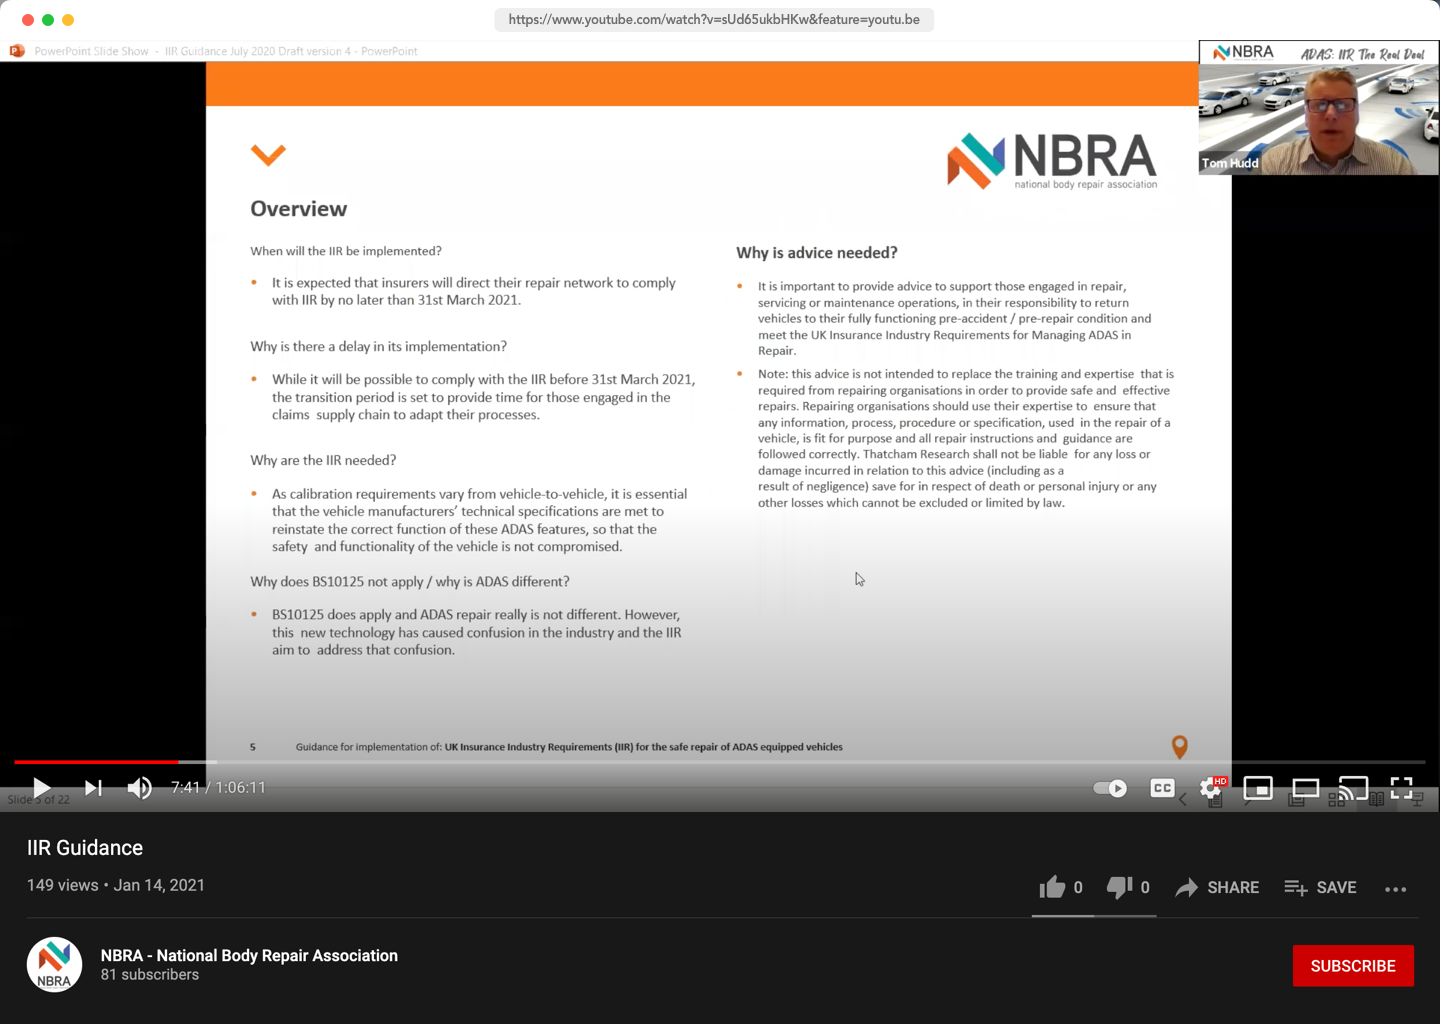 NBRA IIR Webinar now available, head over to our YouTube channel!